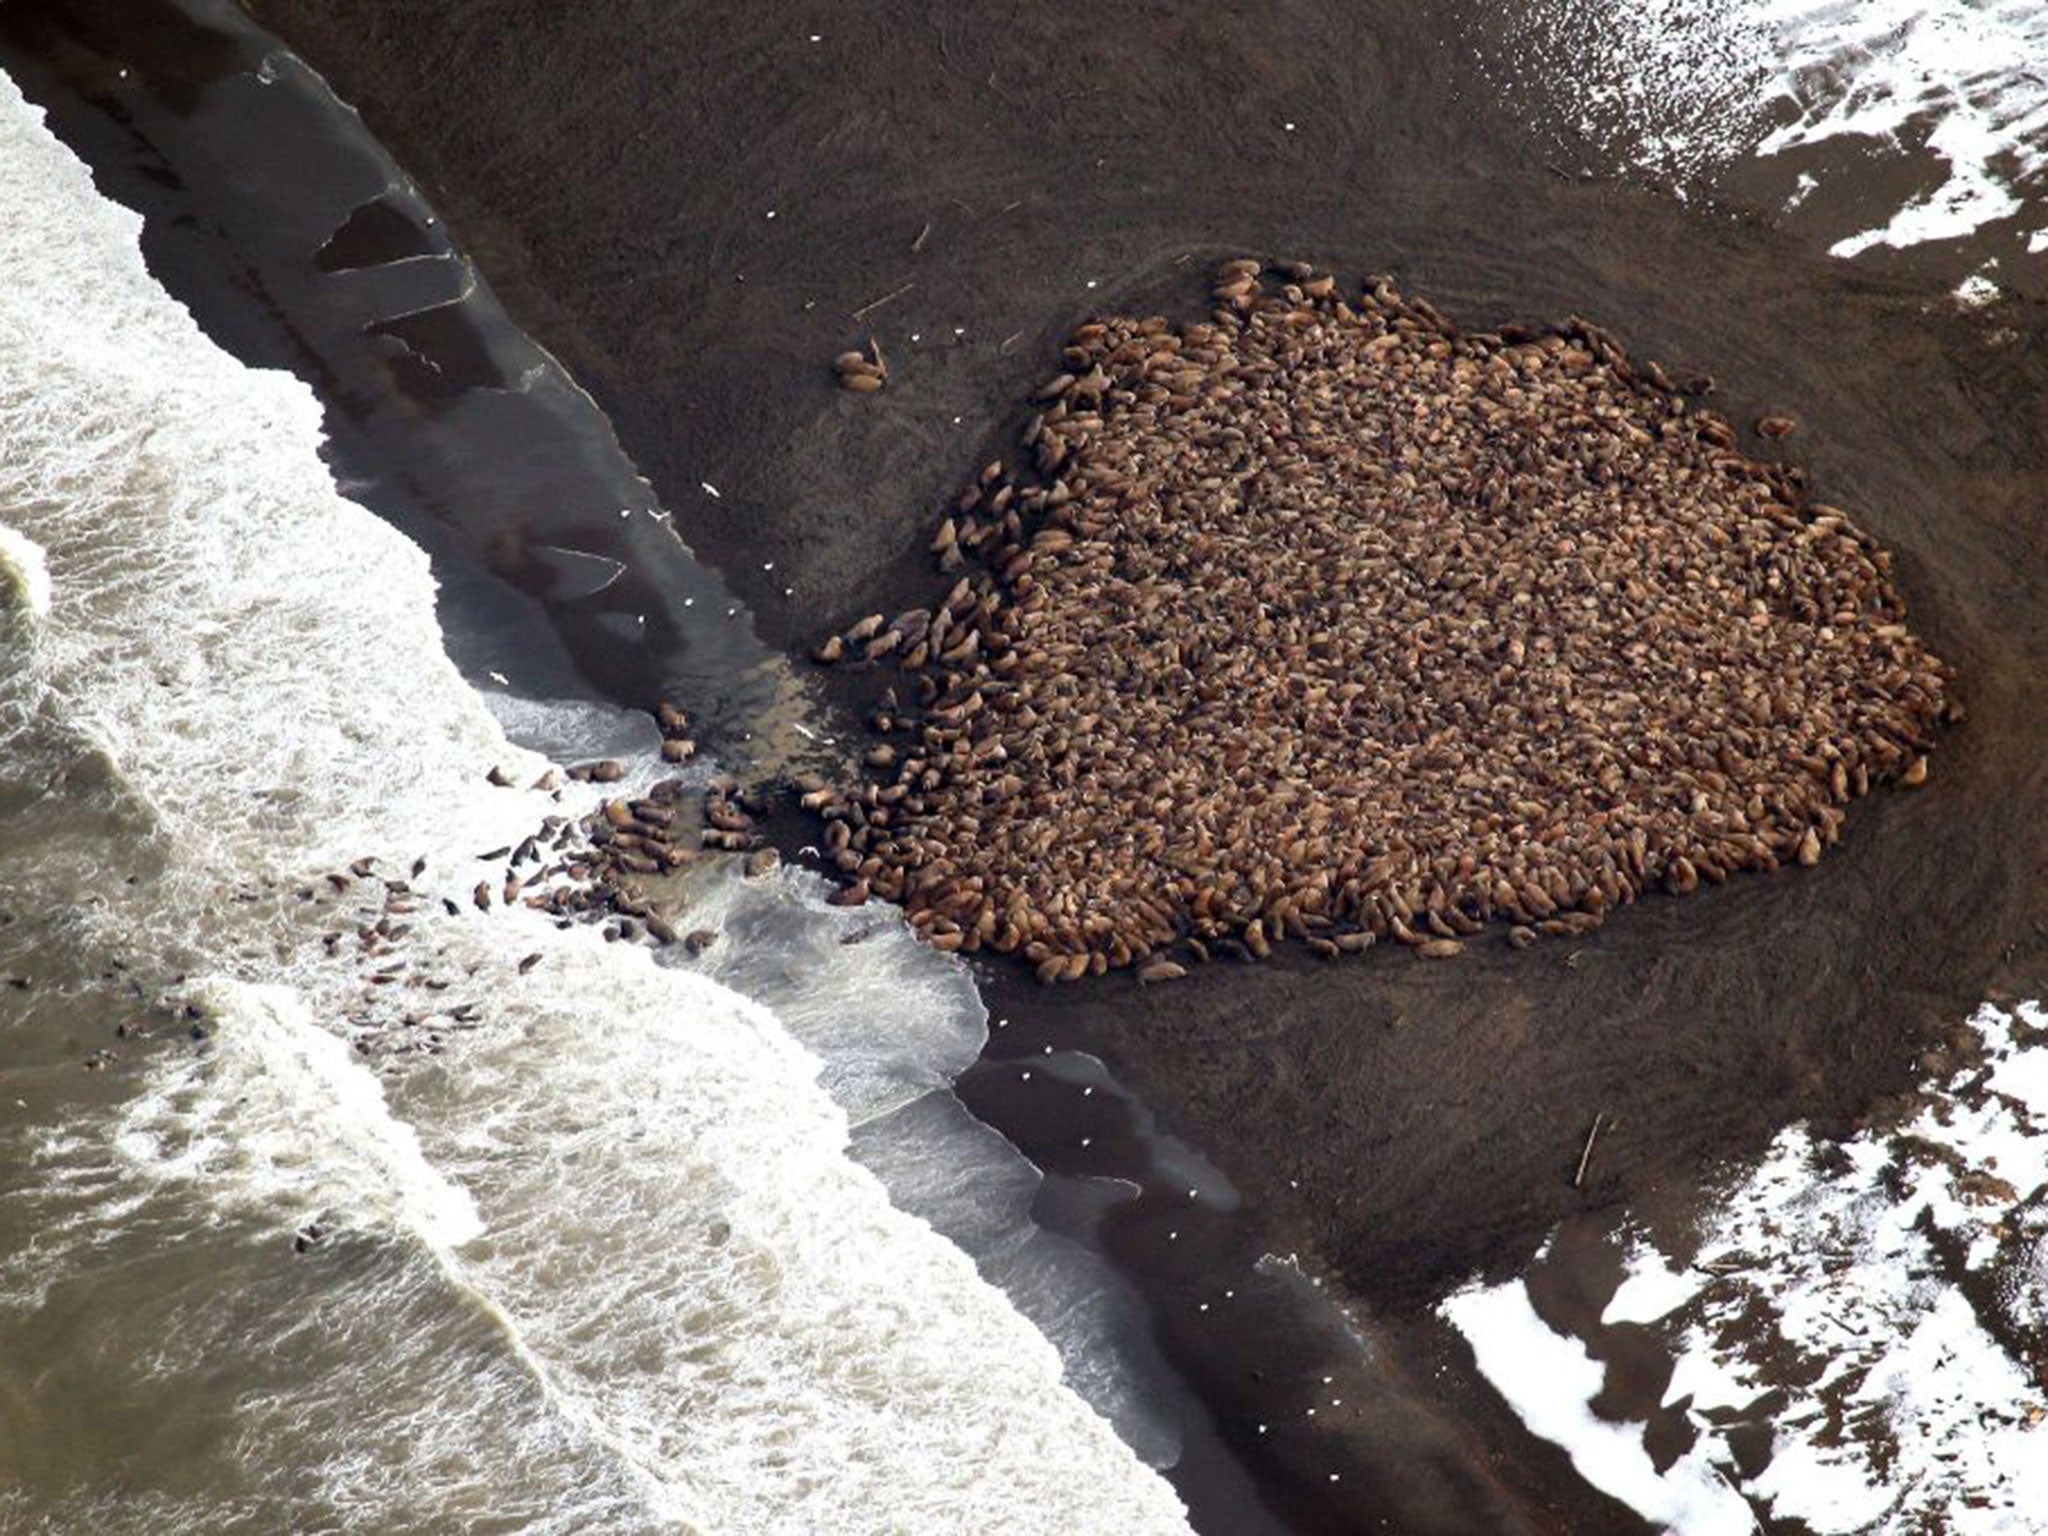 35,000 Pacific walruses came ashore, unable to find sea ice